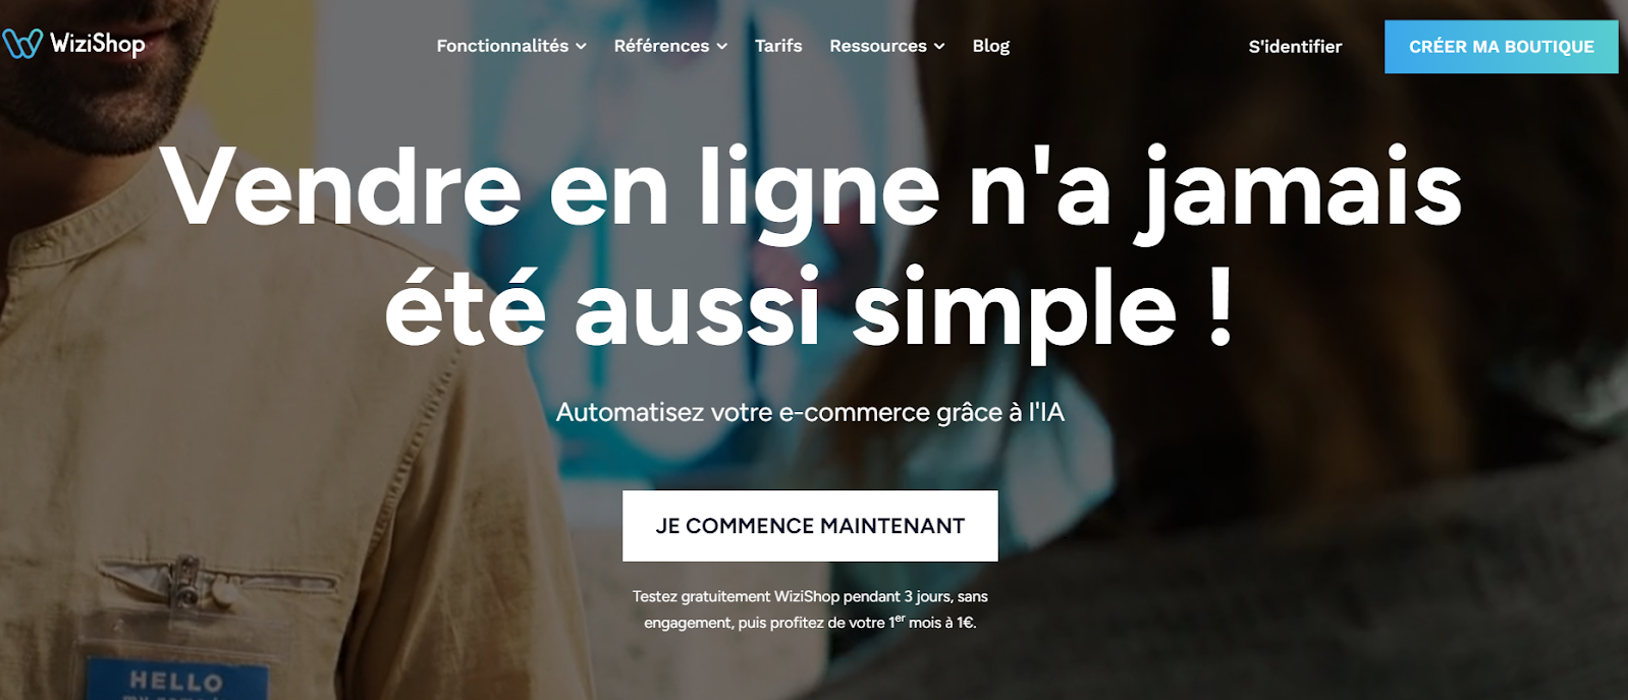 wizishop page d'accueil